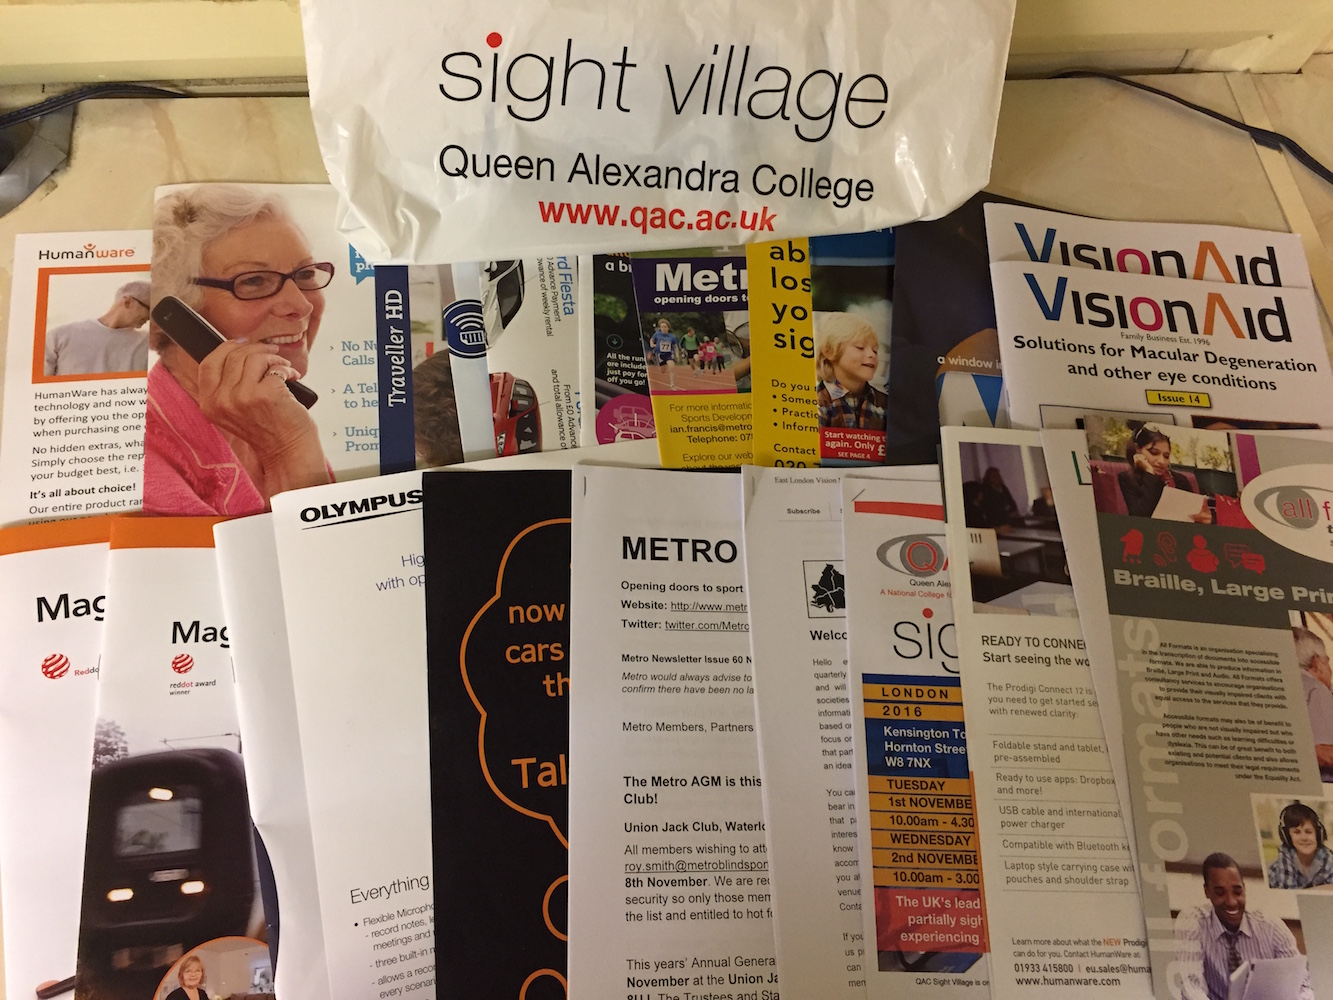 Large collection of booklets and leaflets from Sight Village for various organisations. At the back is a bag that says Sight Village, Queen Alexandra College, www.qac.ac.uk.